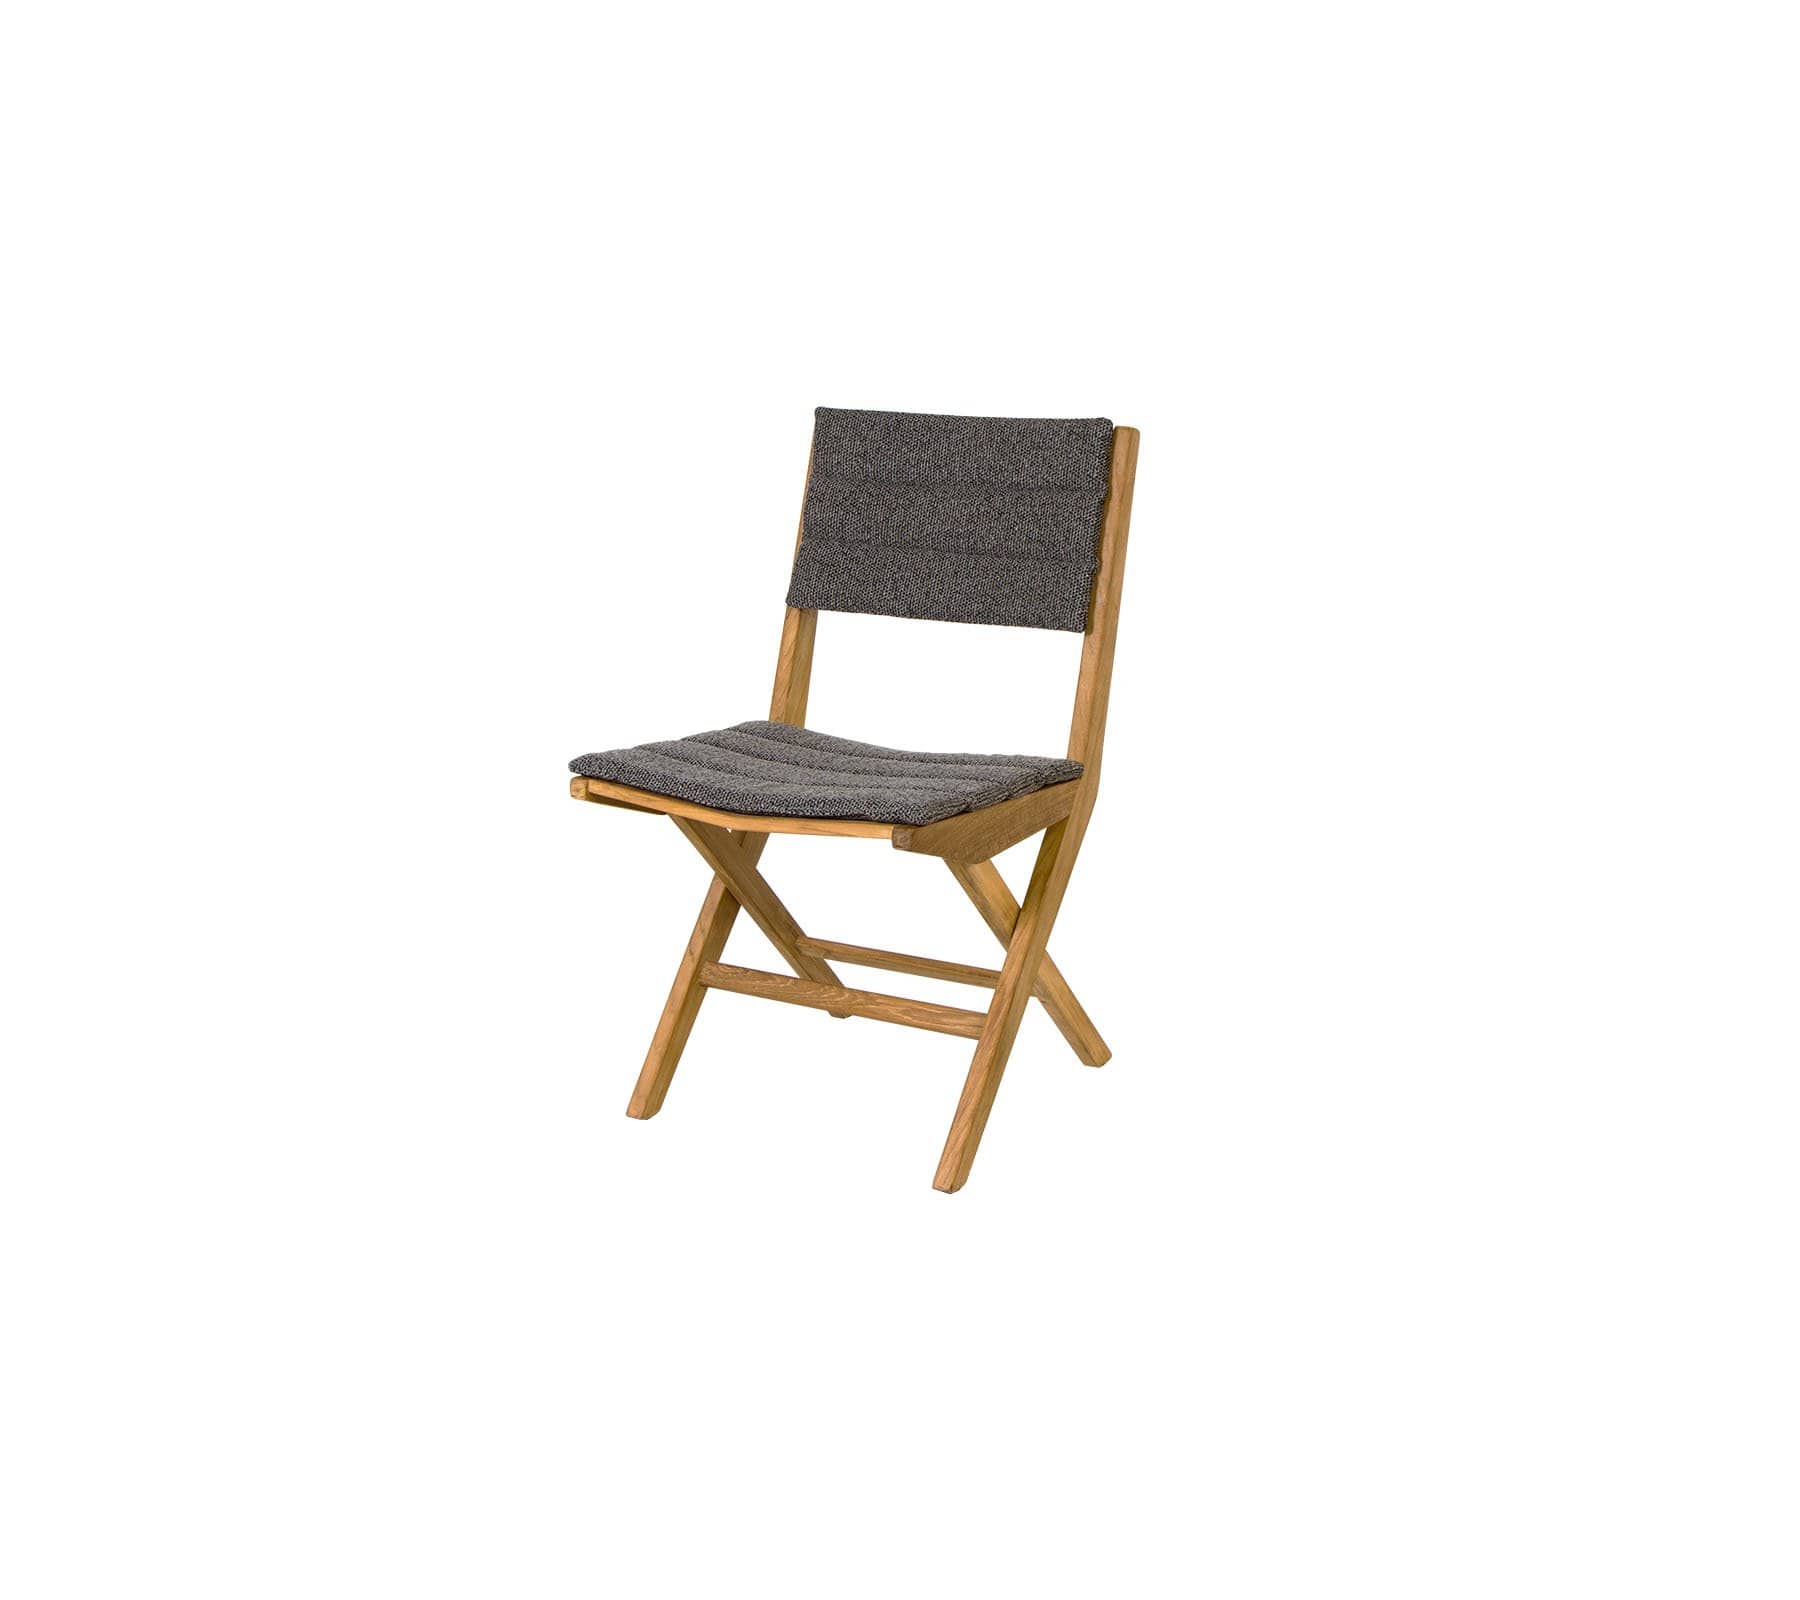 Boxhill's Flip Folding Outdoor Teak Dining chair with Grey Cushion front side view in white background